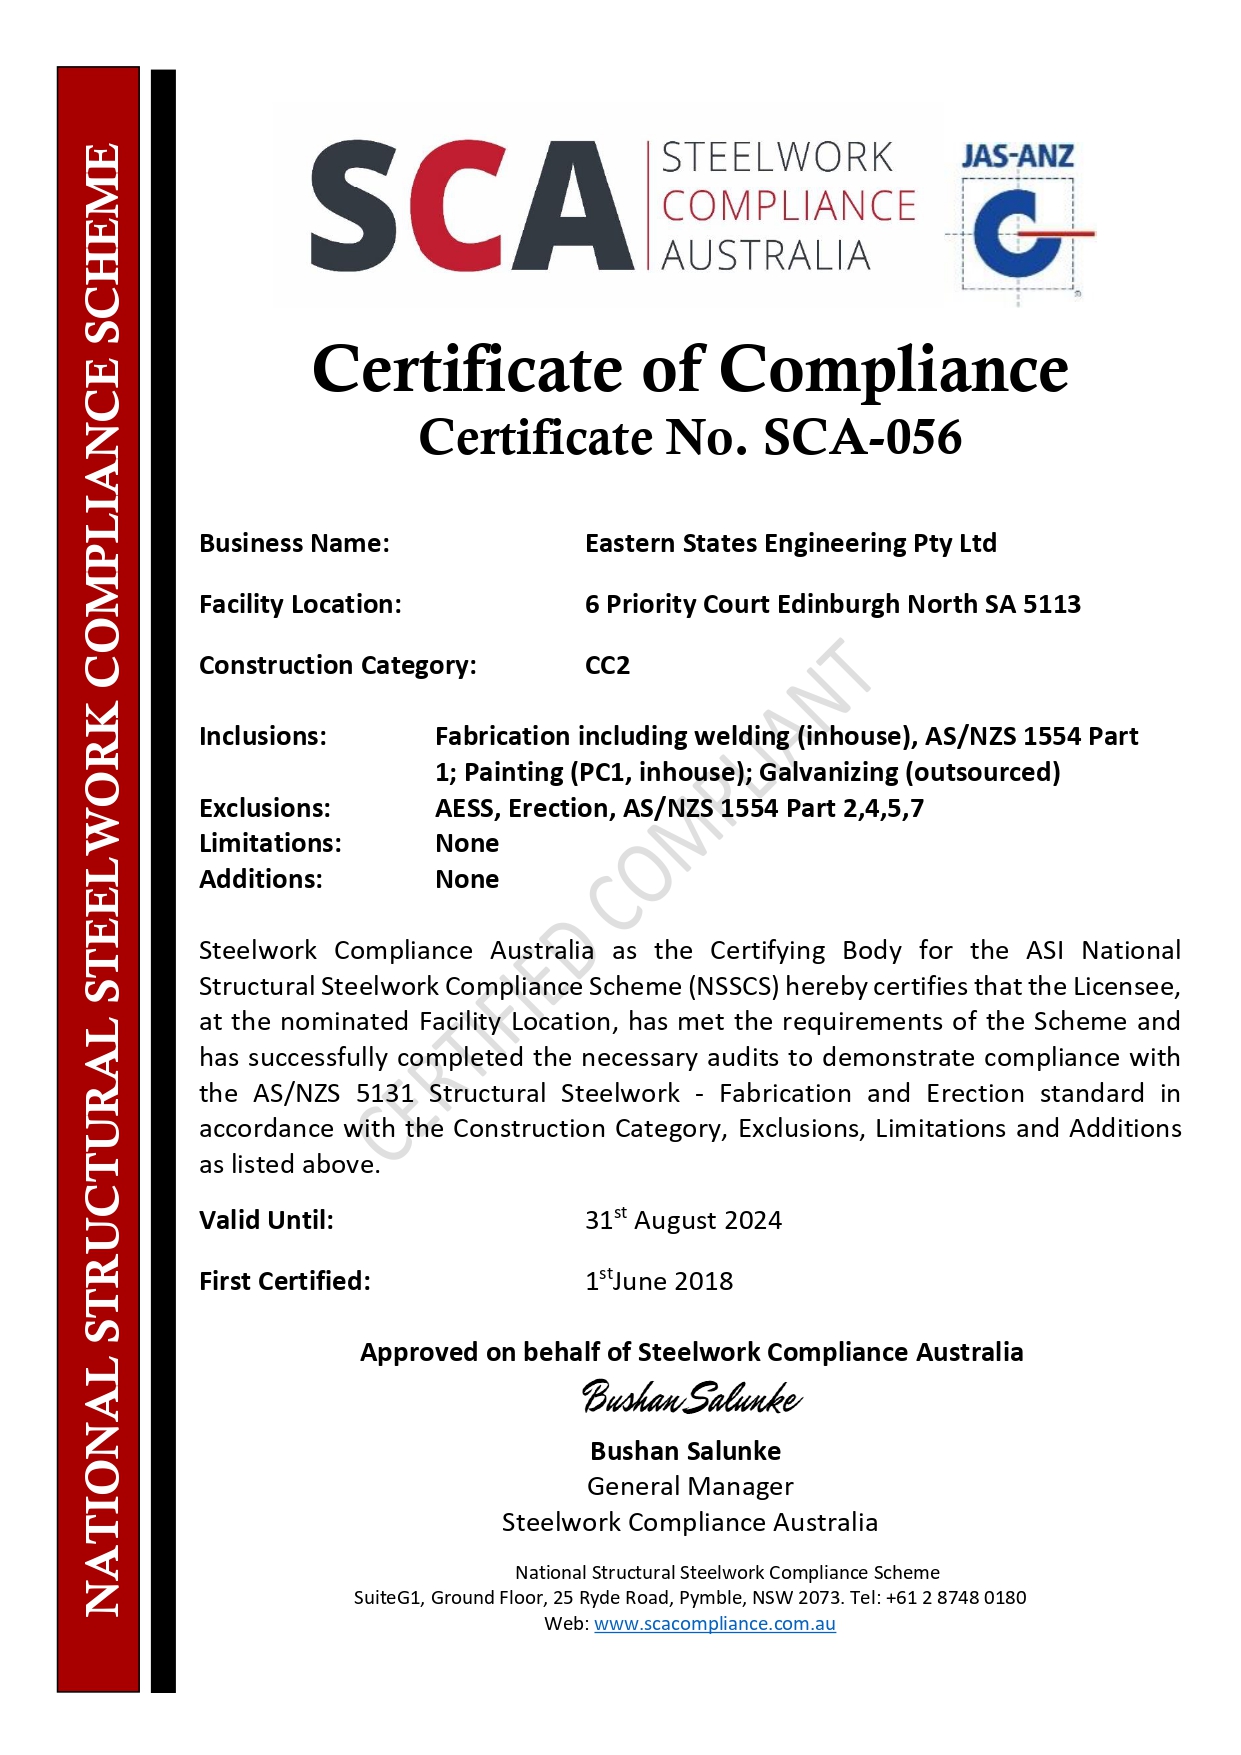 SCA-056 CC2 Certificate of Compliance Eastern States SA 31-08-2024